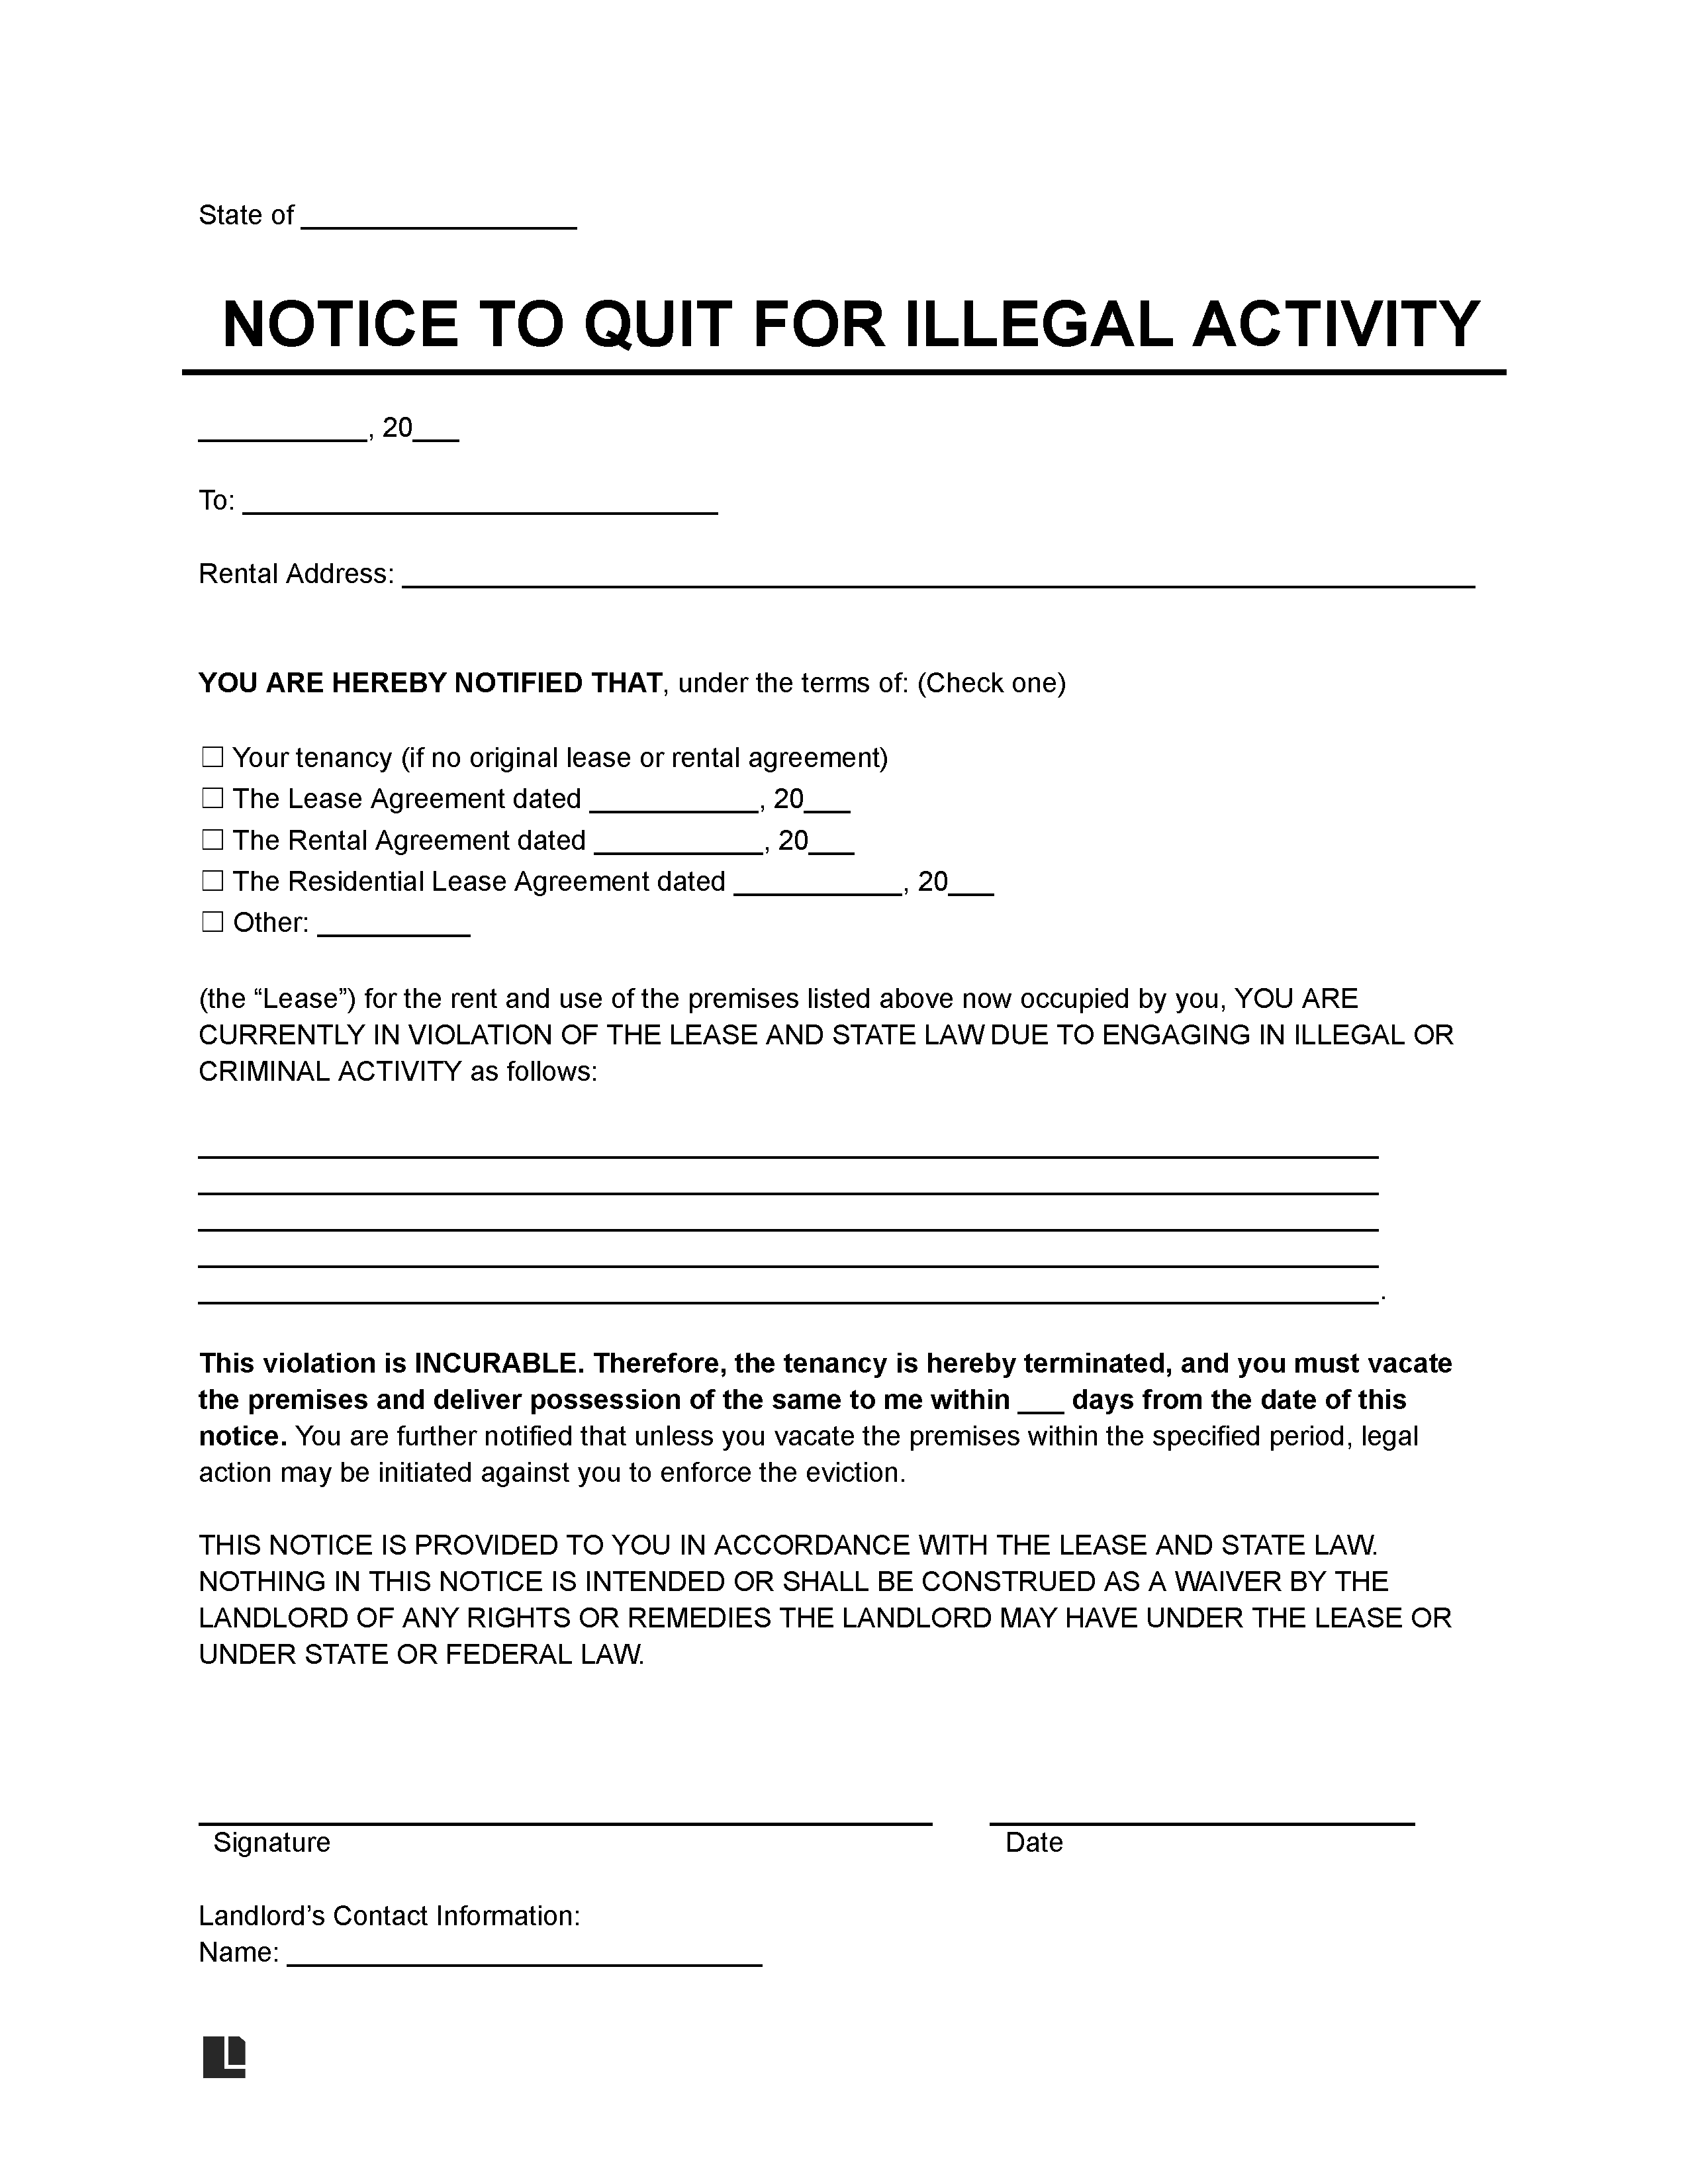 Eviction Notice to Quit for Illegal Activity Template